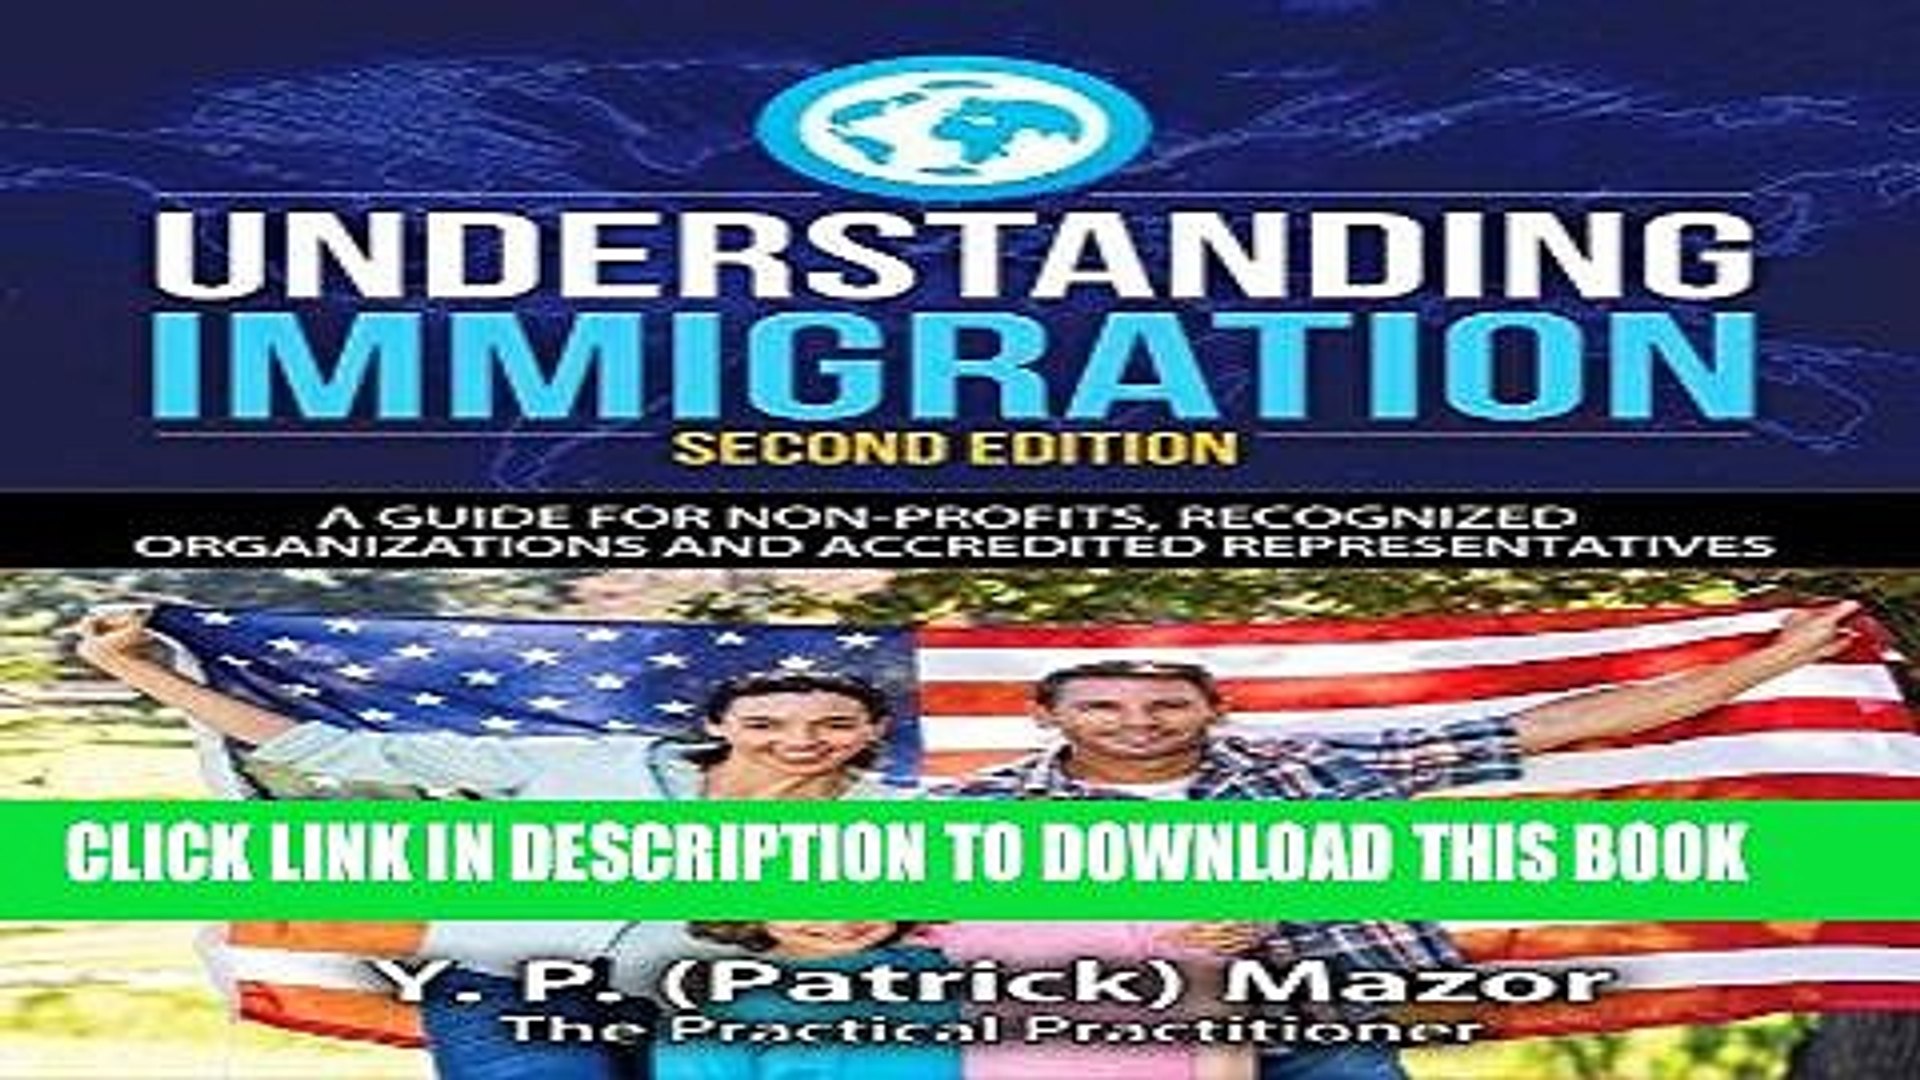 ⁣[Read] Ebook Understanding Immigration: A Guide for Non-Profits, Recognized Organizations and